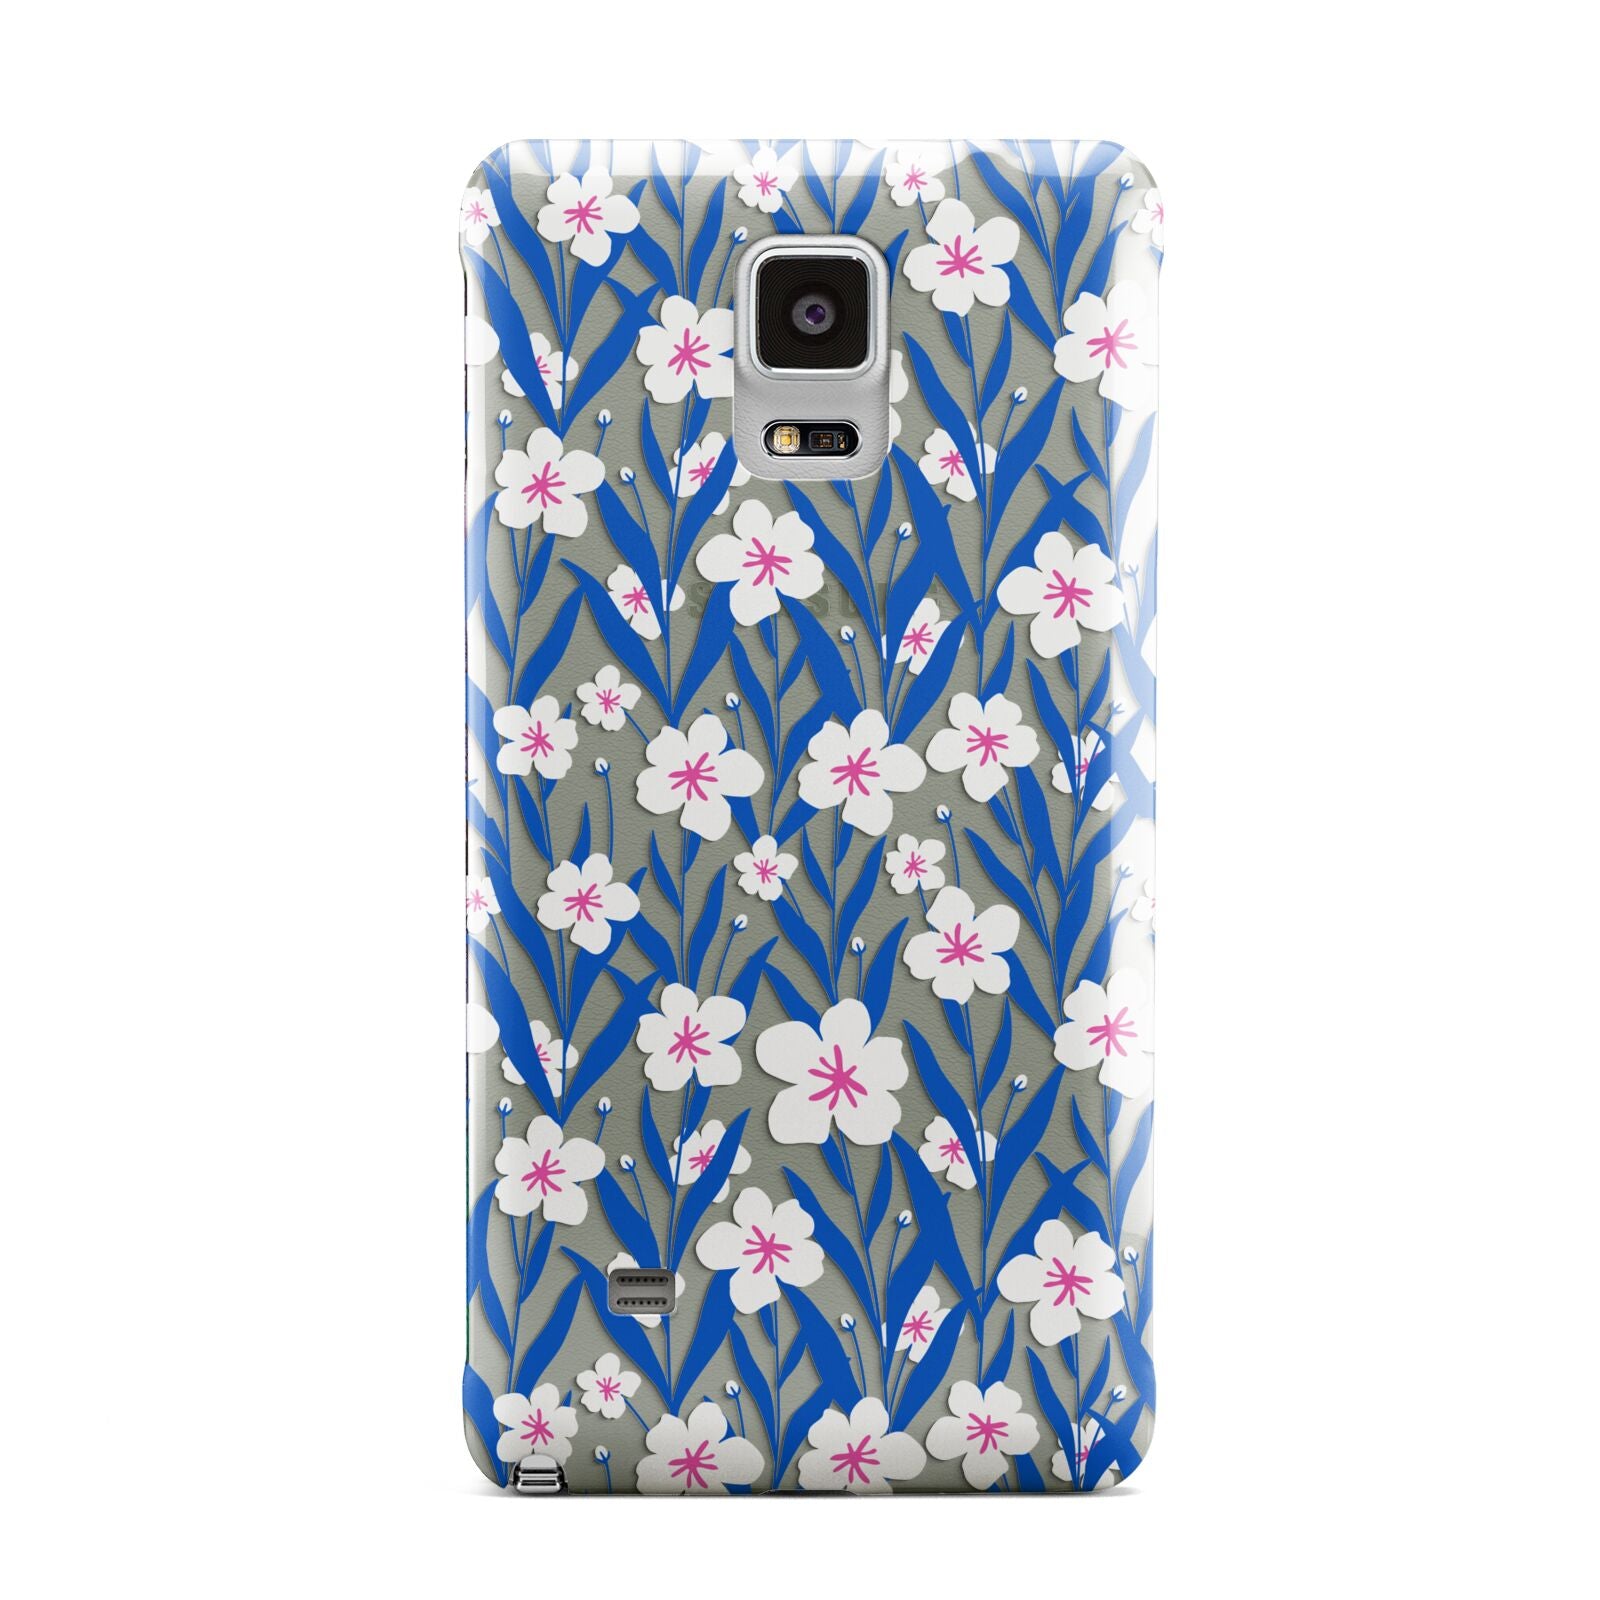 Blue and White Flowers Samsung Galaxy Note 4 Case